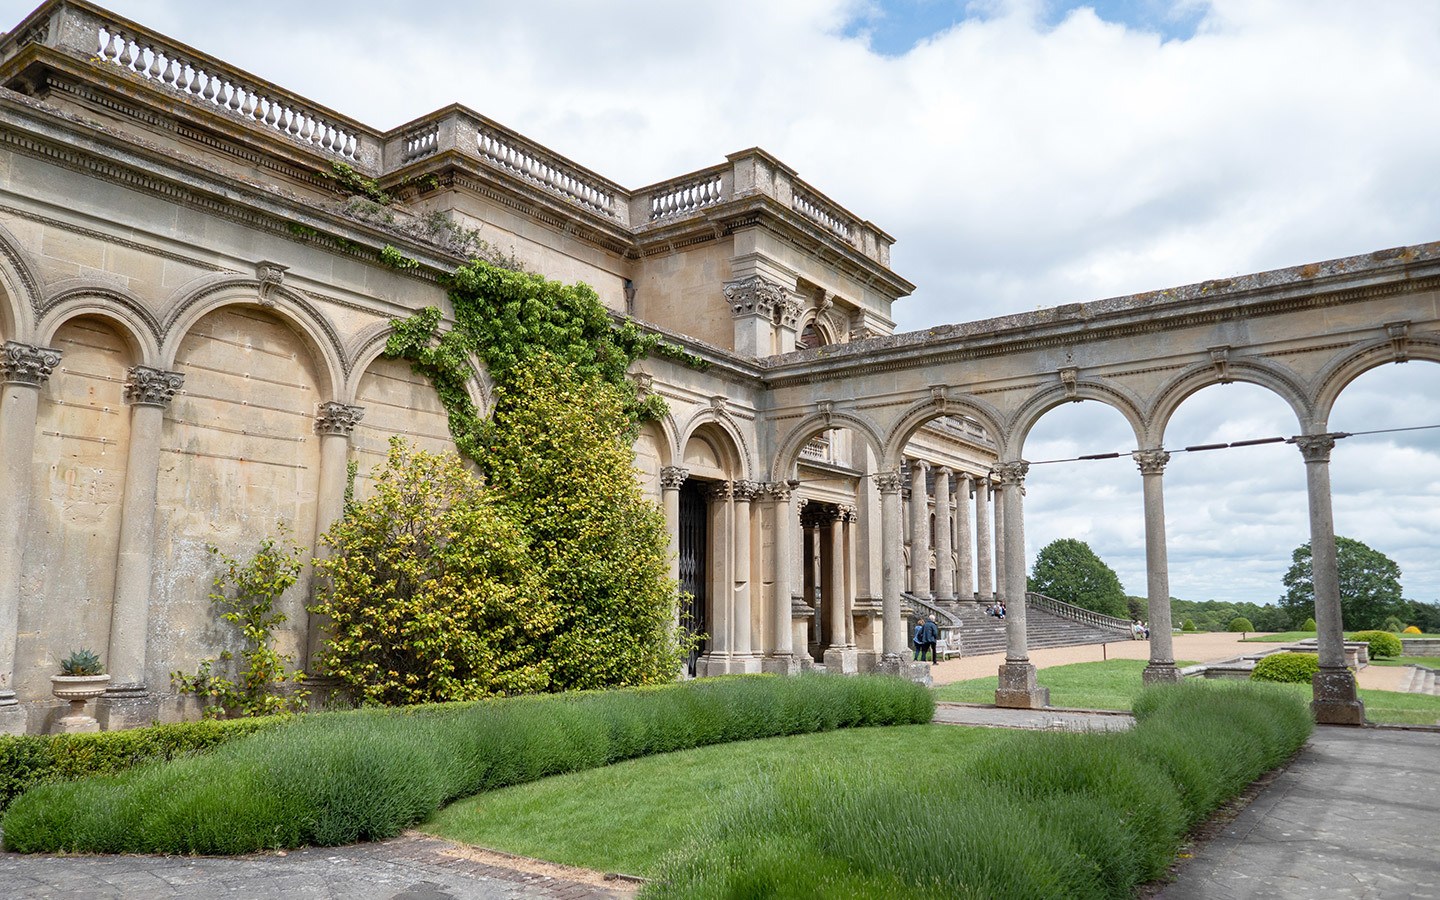 The ruined orangery at Witley Court in Worcestershire